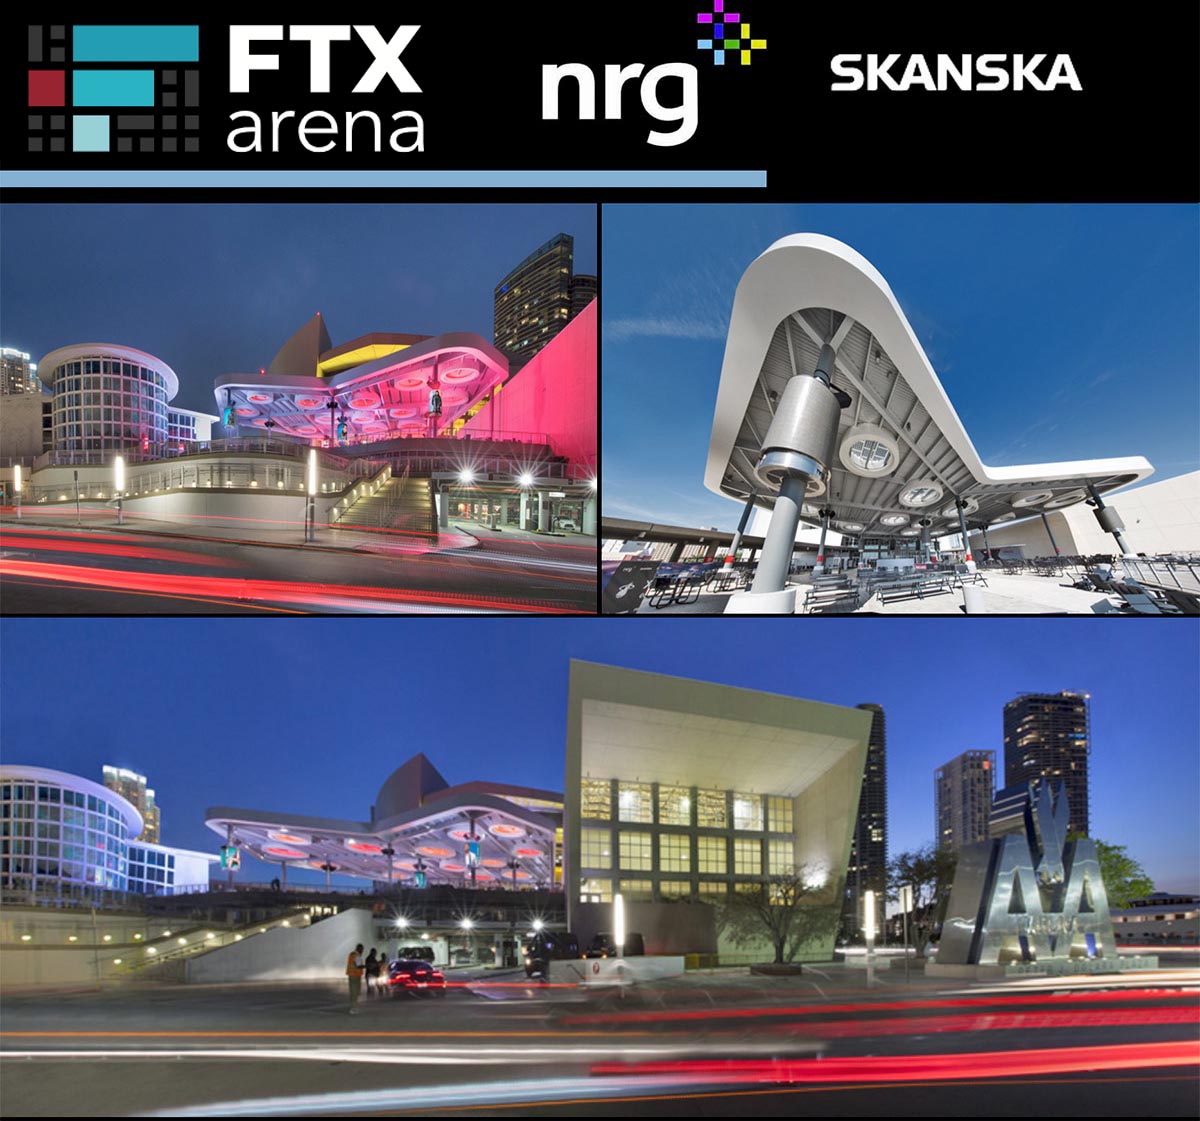 Architectural views of the FTX arena - formerly the American Airlines Arena.